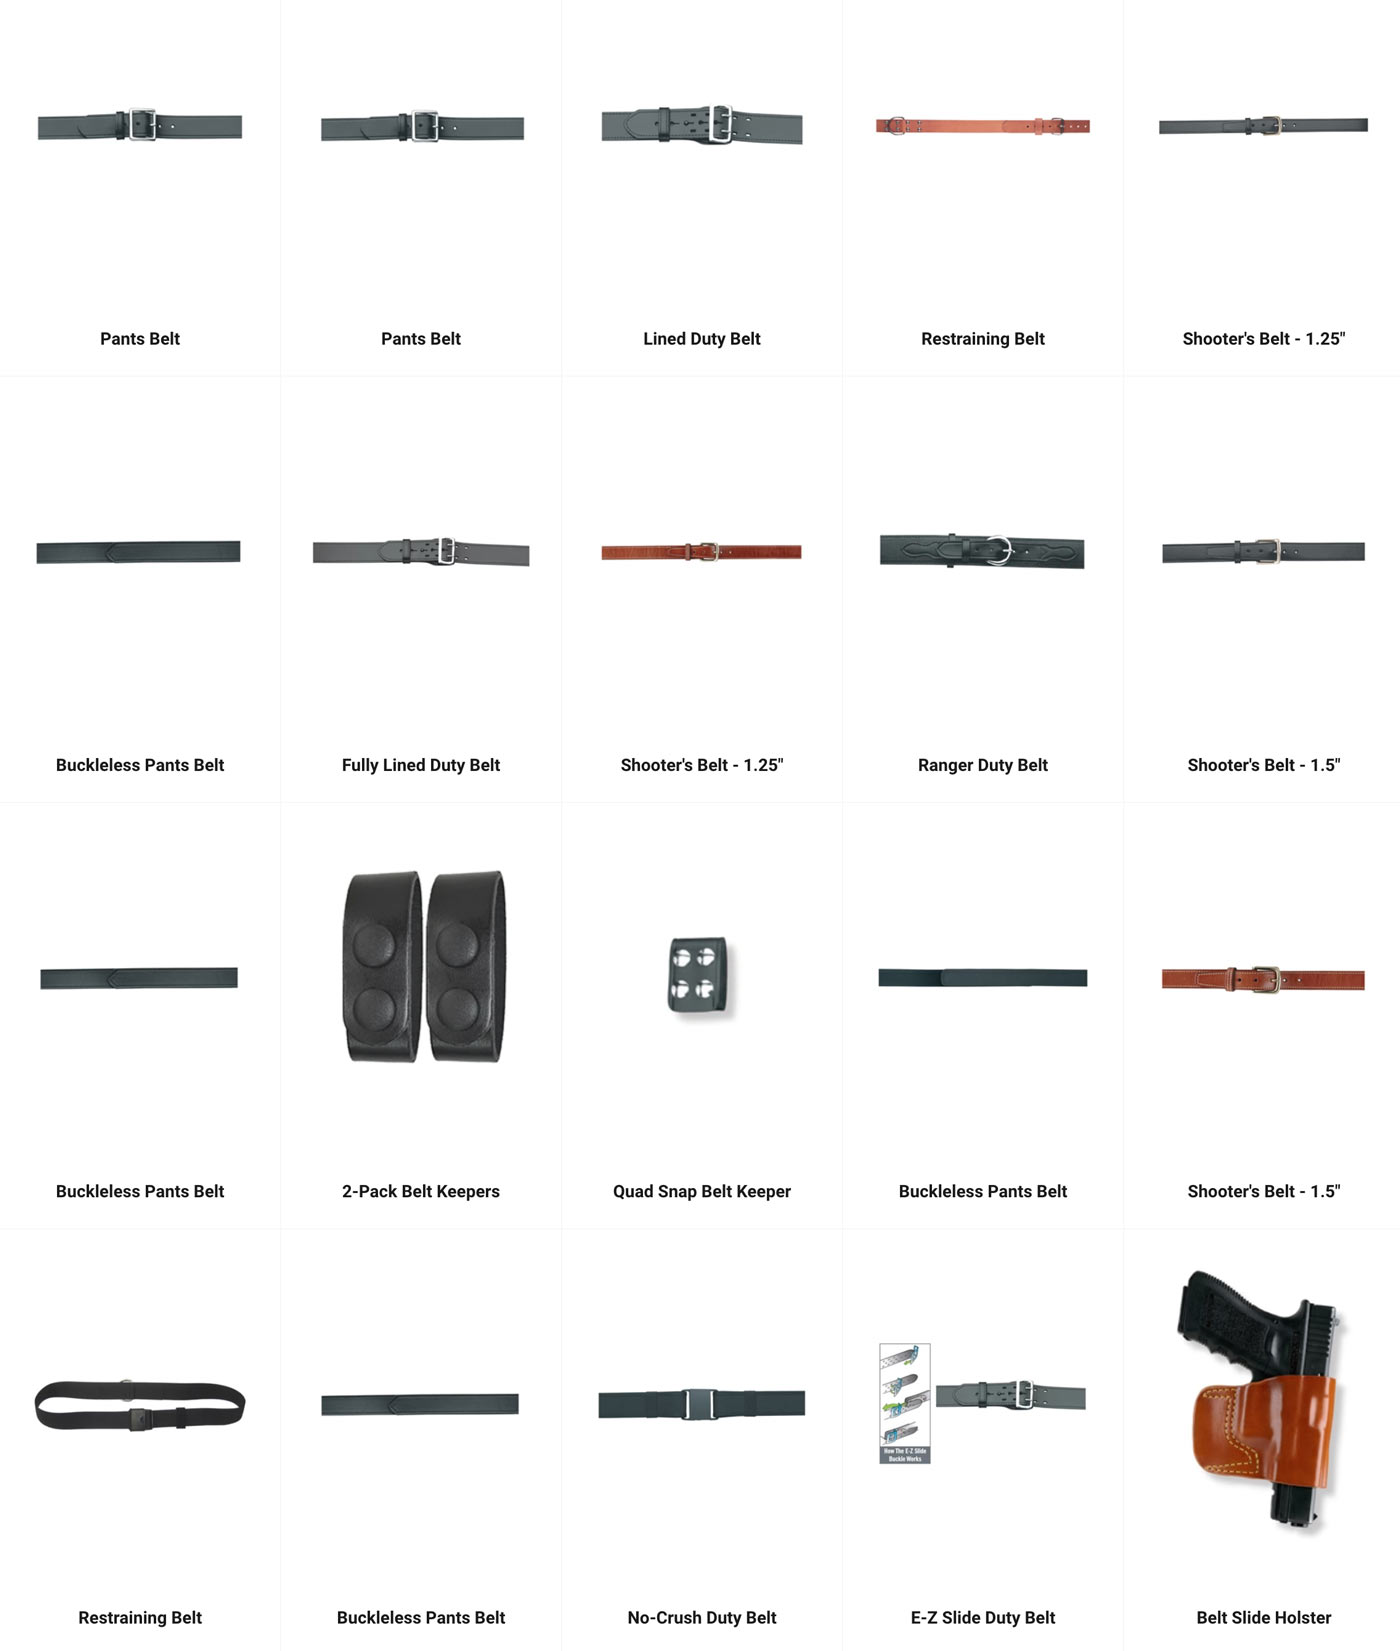 random products group showing belts and duty gear accessories